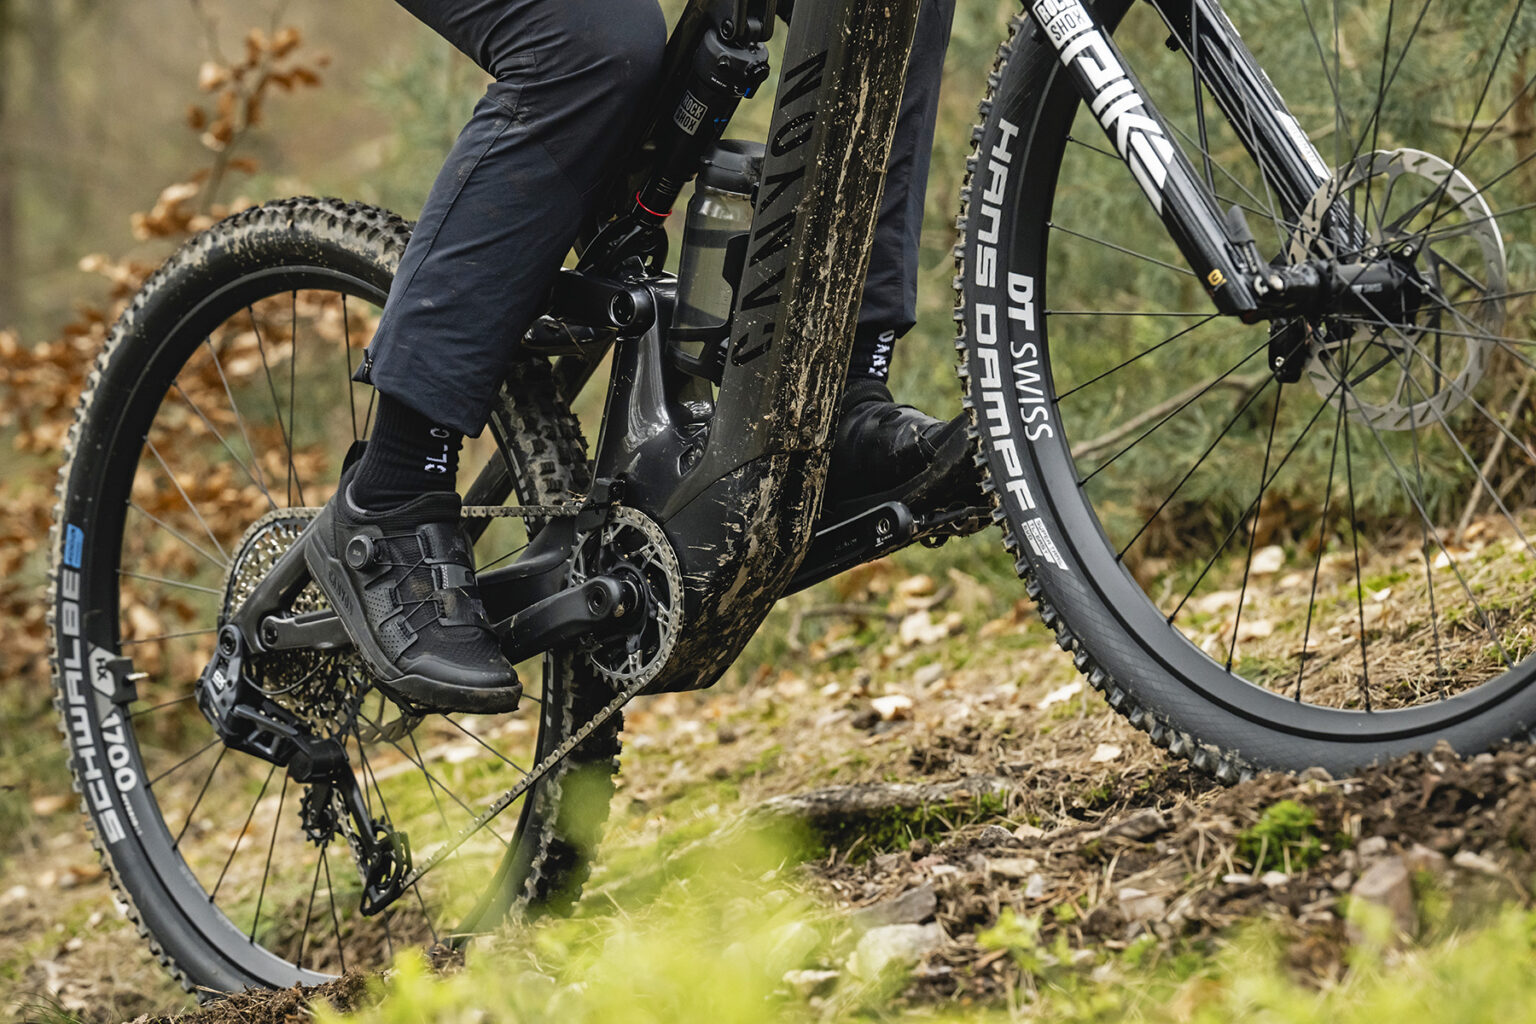 Canyon Neuron:ONfly lightweight 140mm carbon trail ebike with Bosch SX motor, powertrain detail